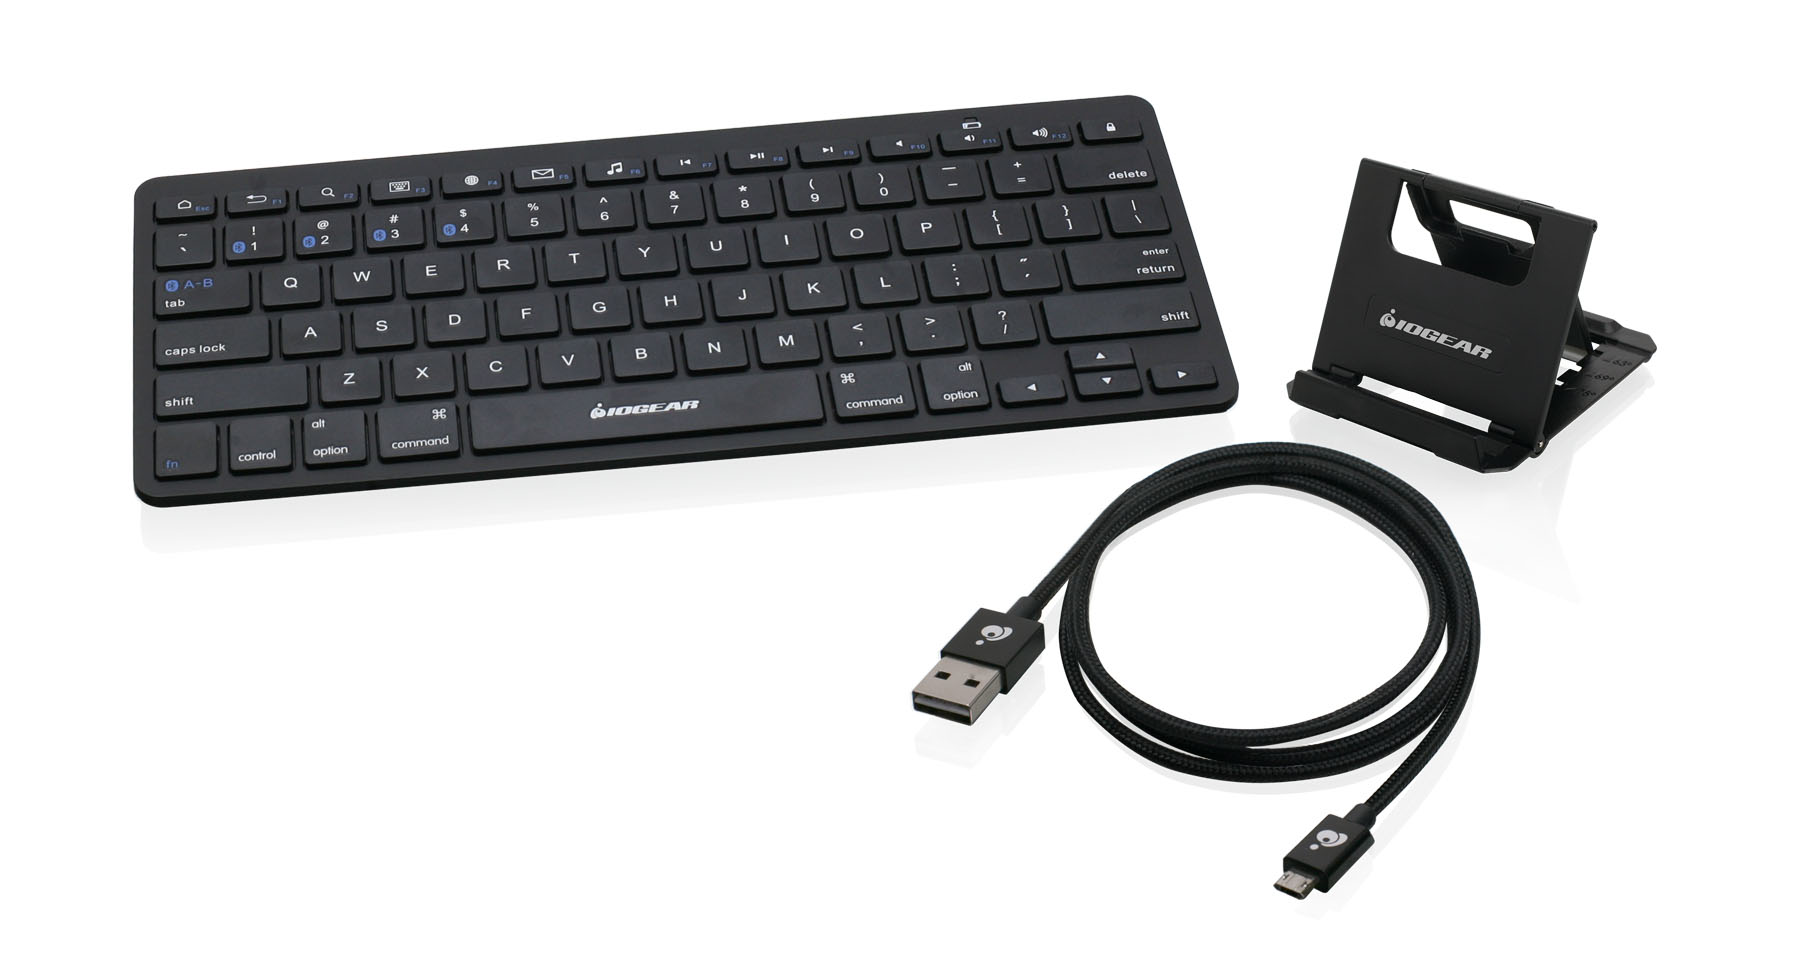 DURAGADGET Black Left-Handed Wired Numeric QWERTY Keyboard for PCs/Laptops/Macs Micro USB Connection & 2 x USB Ports Plug & Play Technology